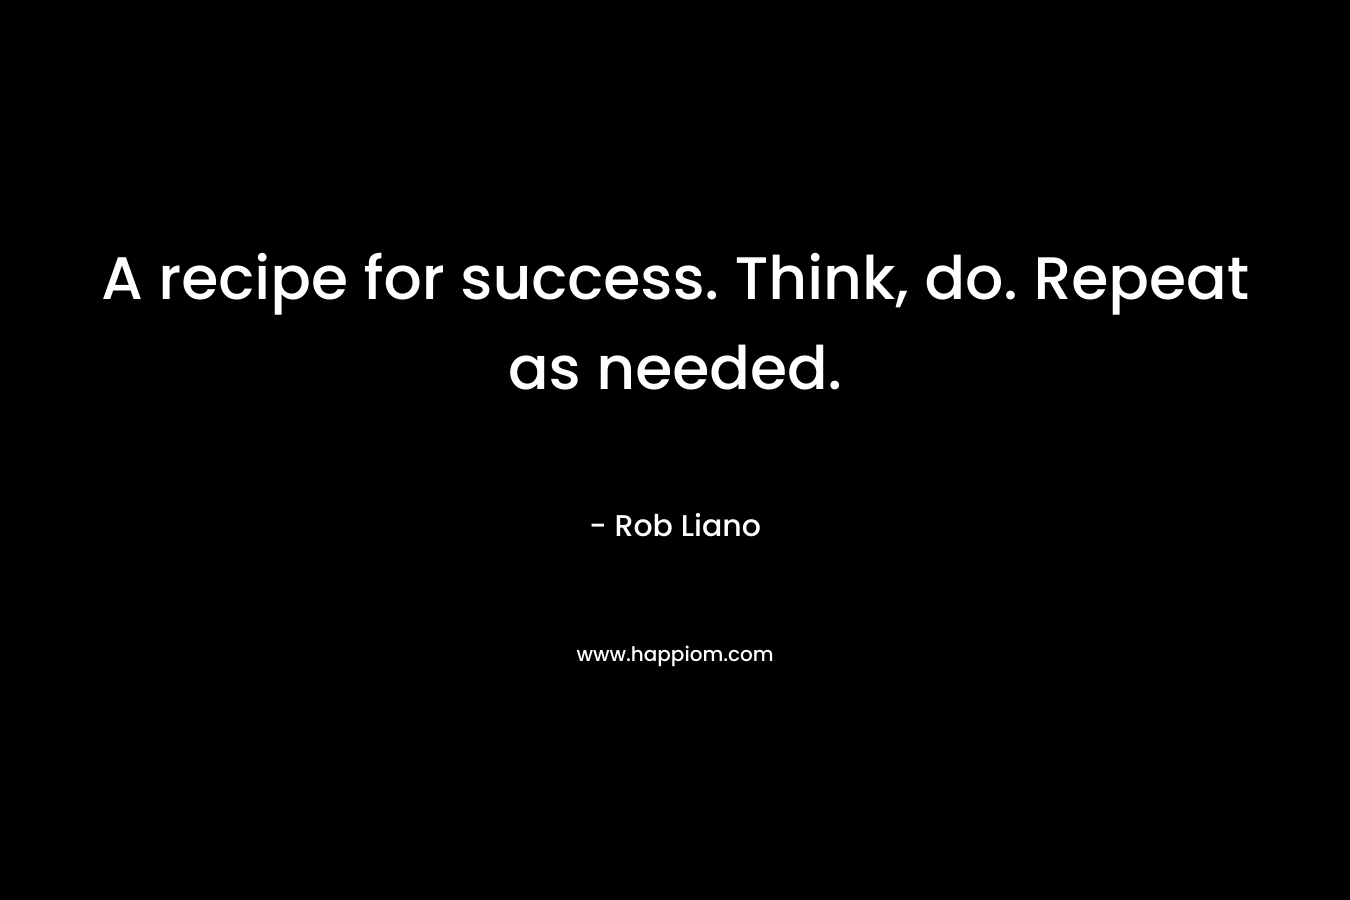 A recipe for success. Think, do. Repeat as needed.